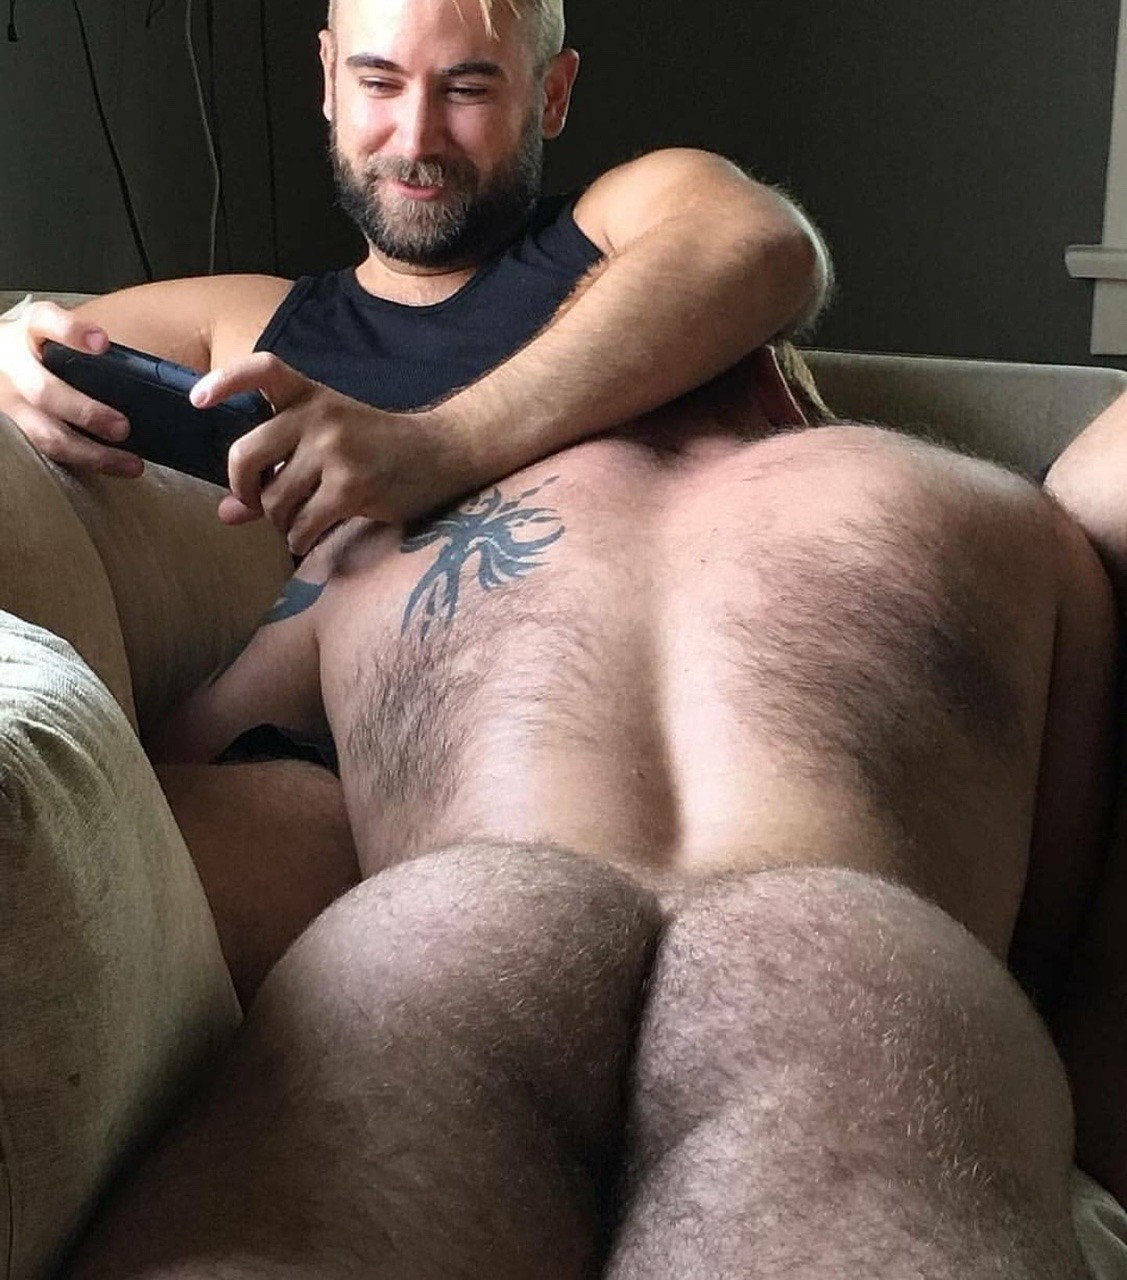 Photo by Smitty with the username @Resol702,  January 25, 2019 at 5:08 AM. The post is about the topic Hairy butt